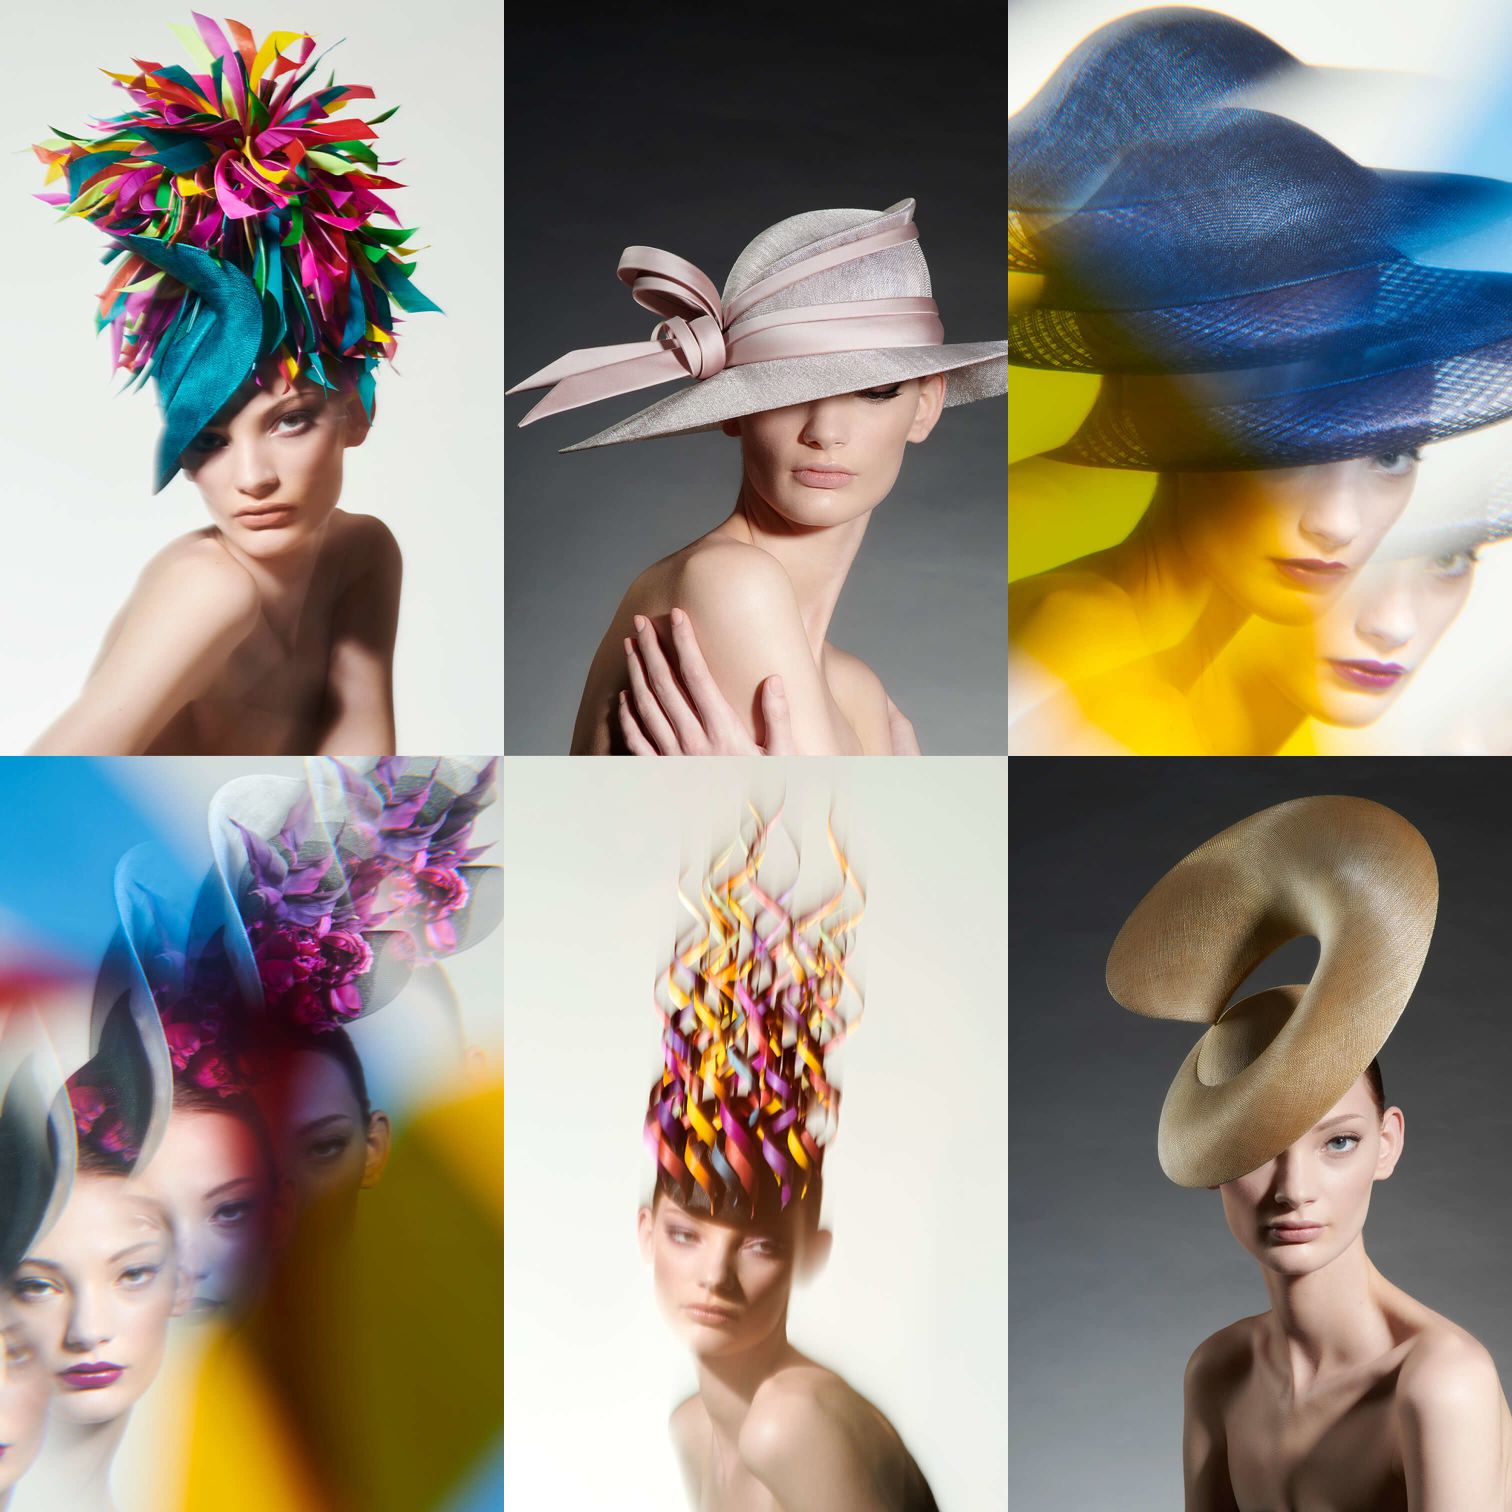 A Collage Of A Person Wearing A Hat